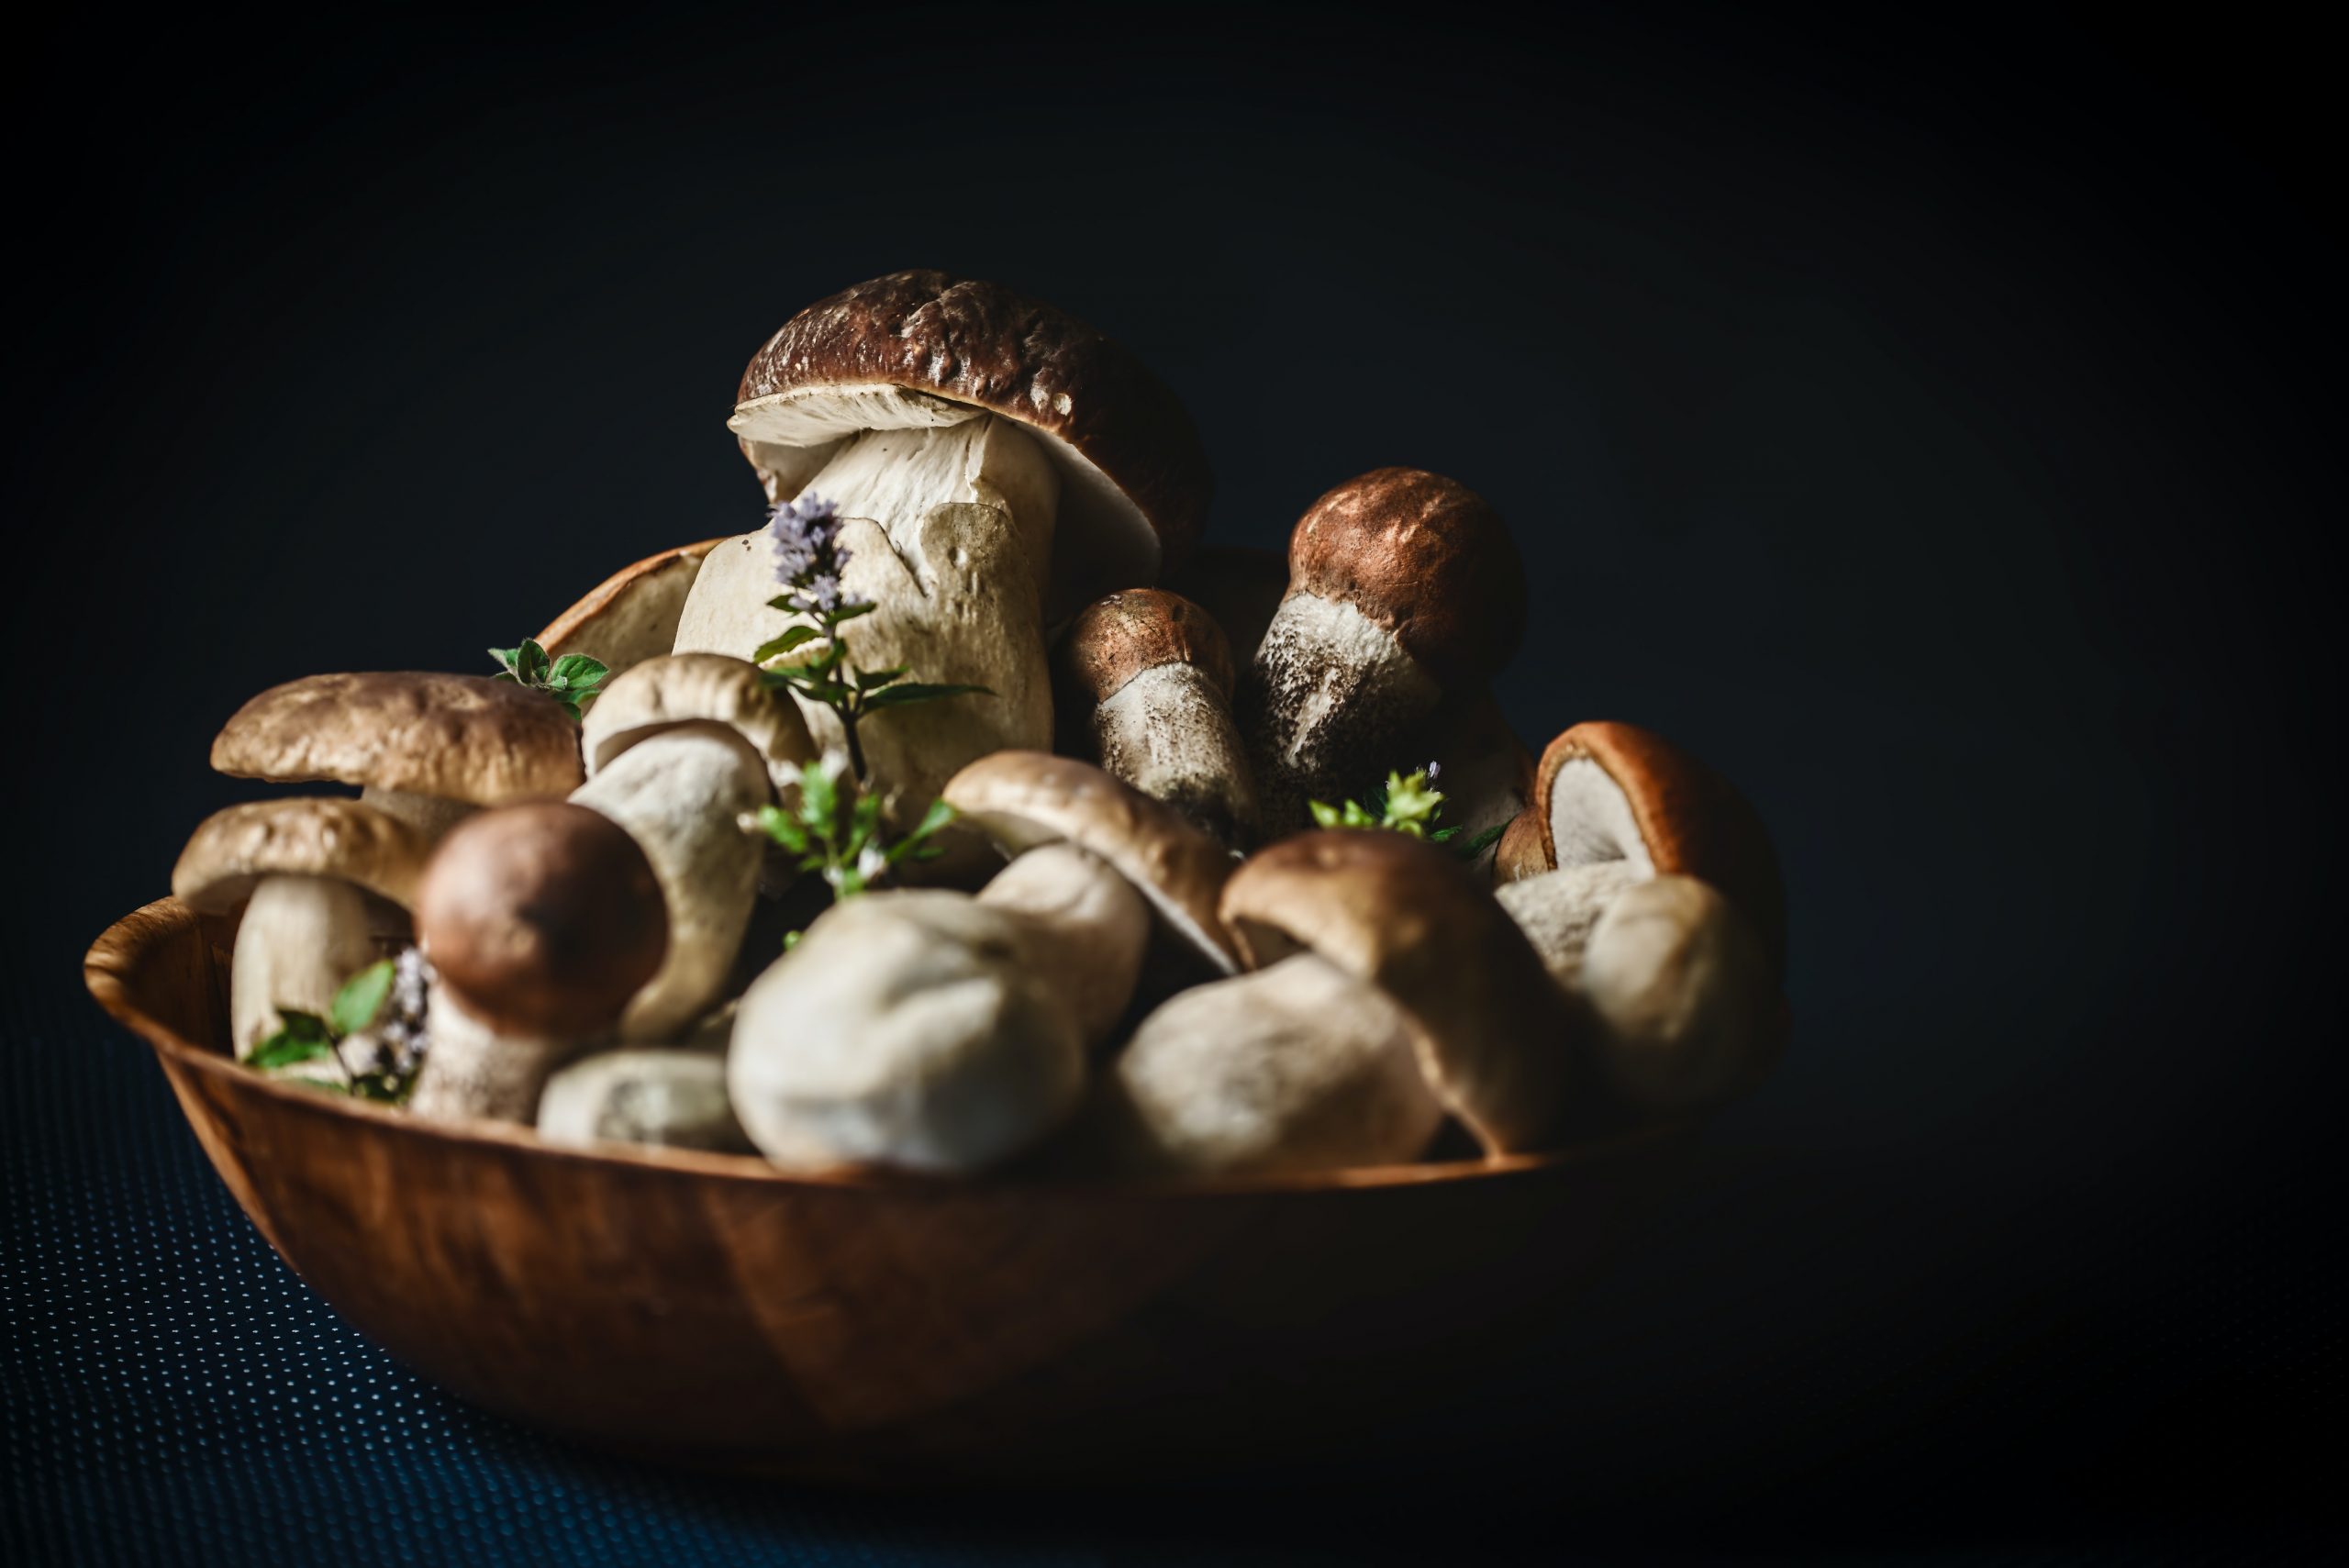 What to eat with shrooms